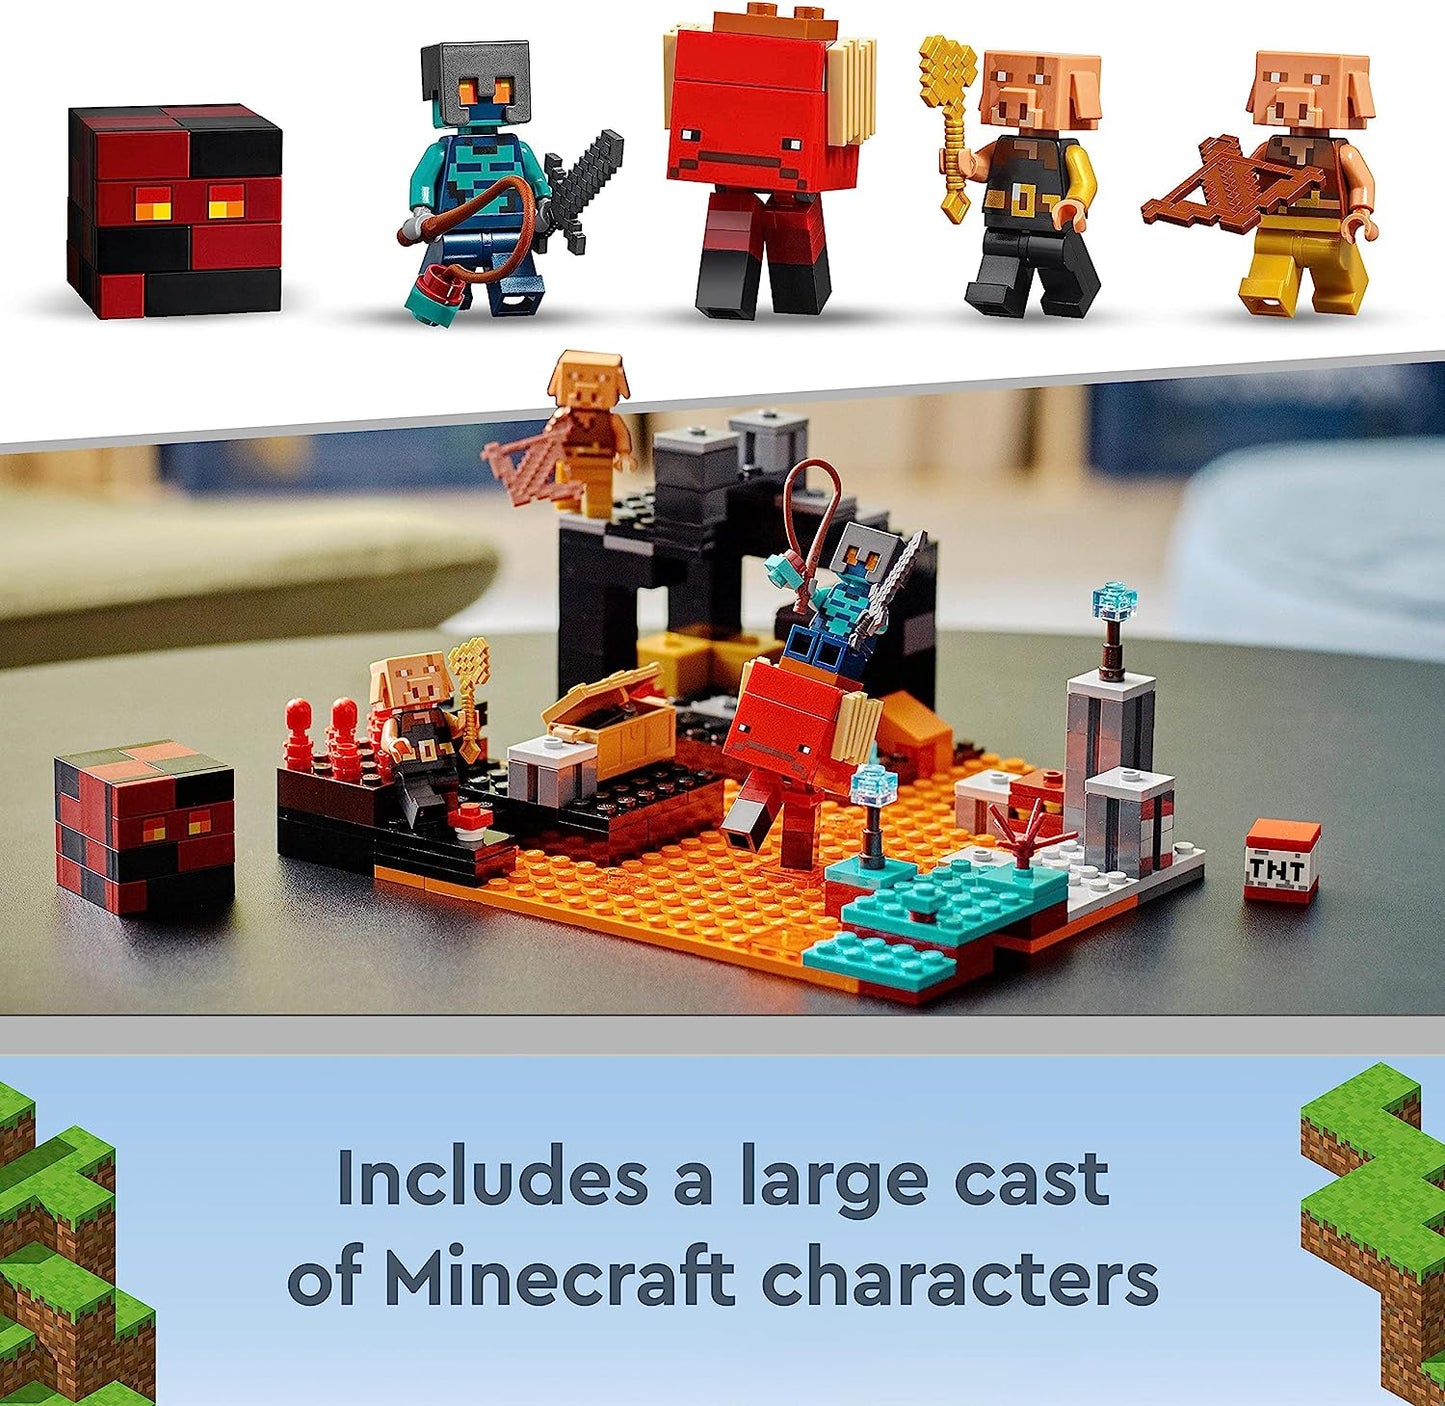 21185 Minecraft the Nether Bastion Set, Battle Action Toy with Mob, Piglin Brute & Strider Figures, for Kids, Boys and Girls Age 8 Plus